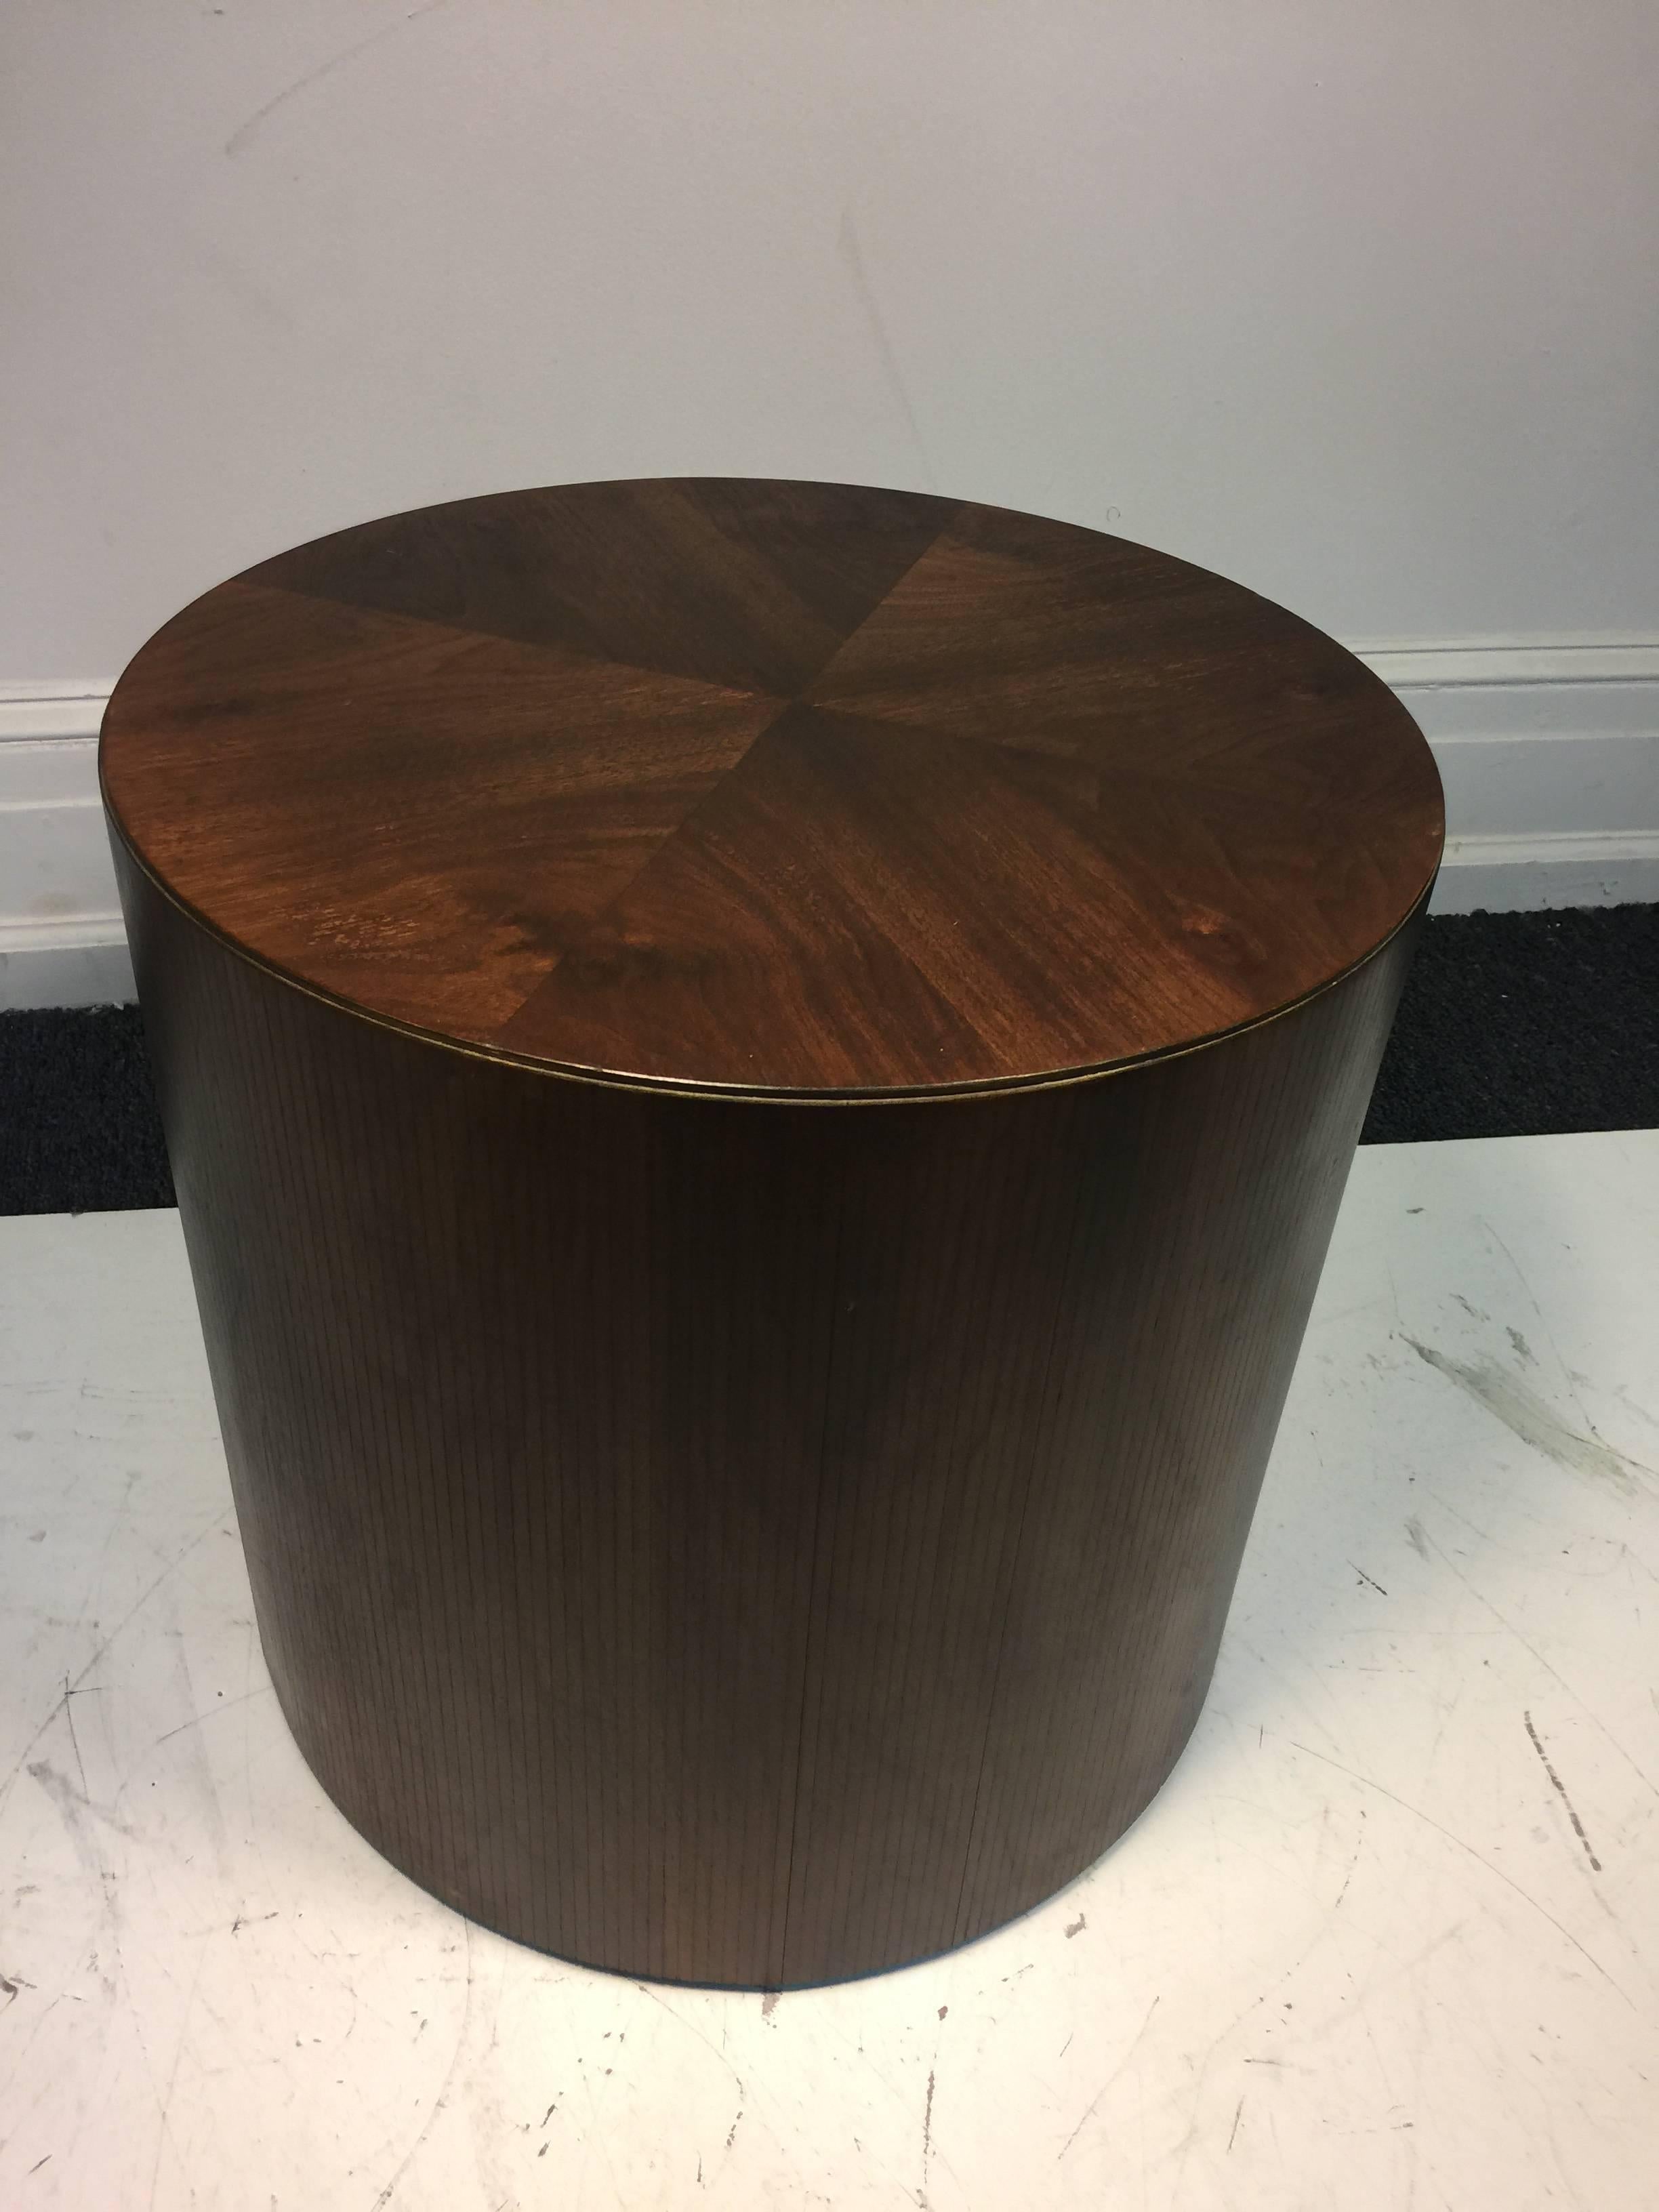 American Substantial Drum Table or Pedestal by Lane For Sale